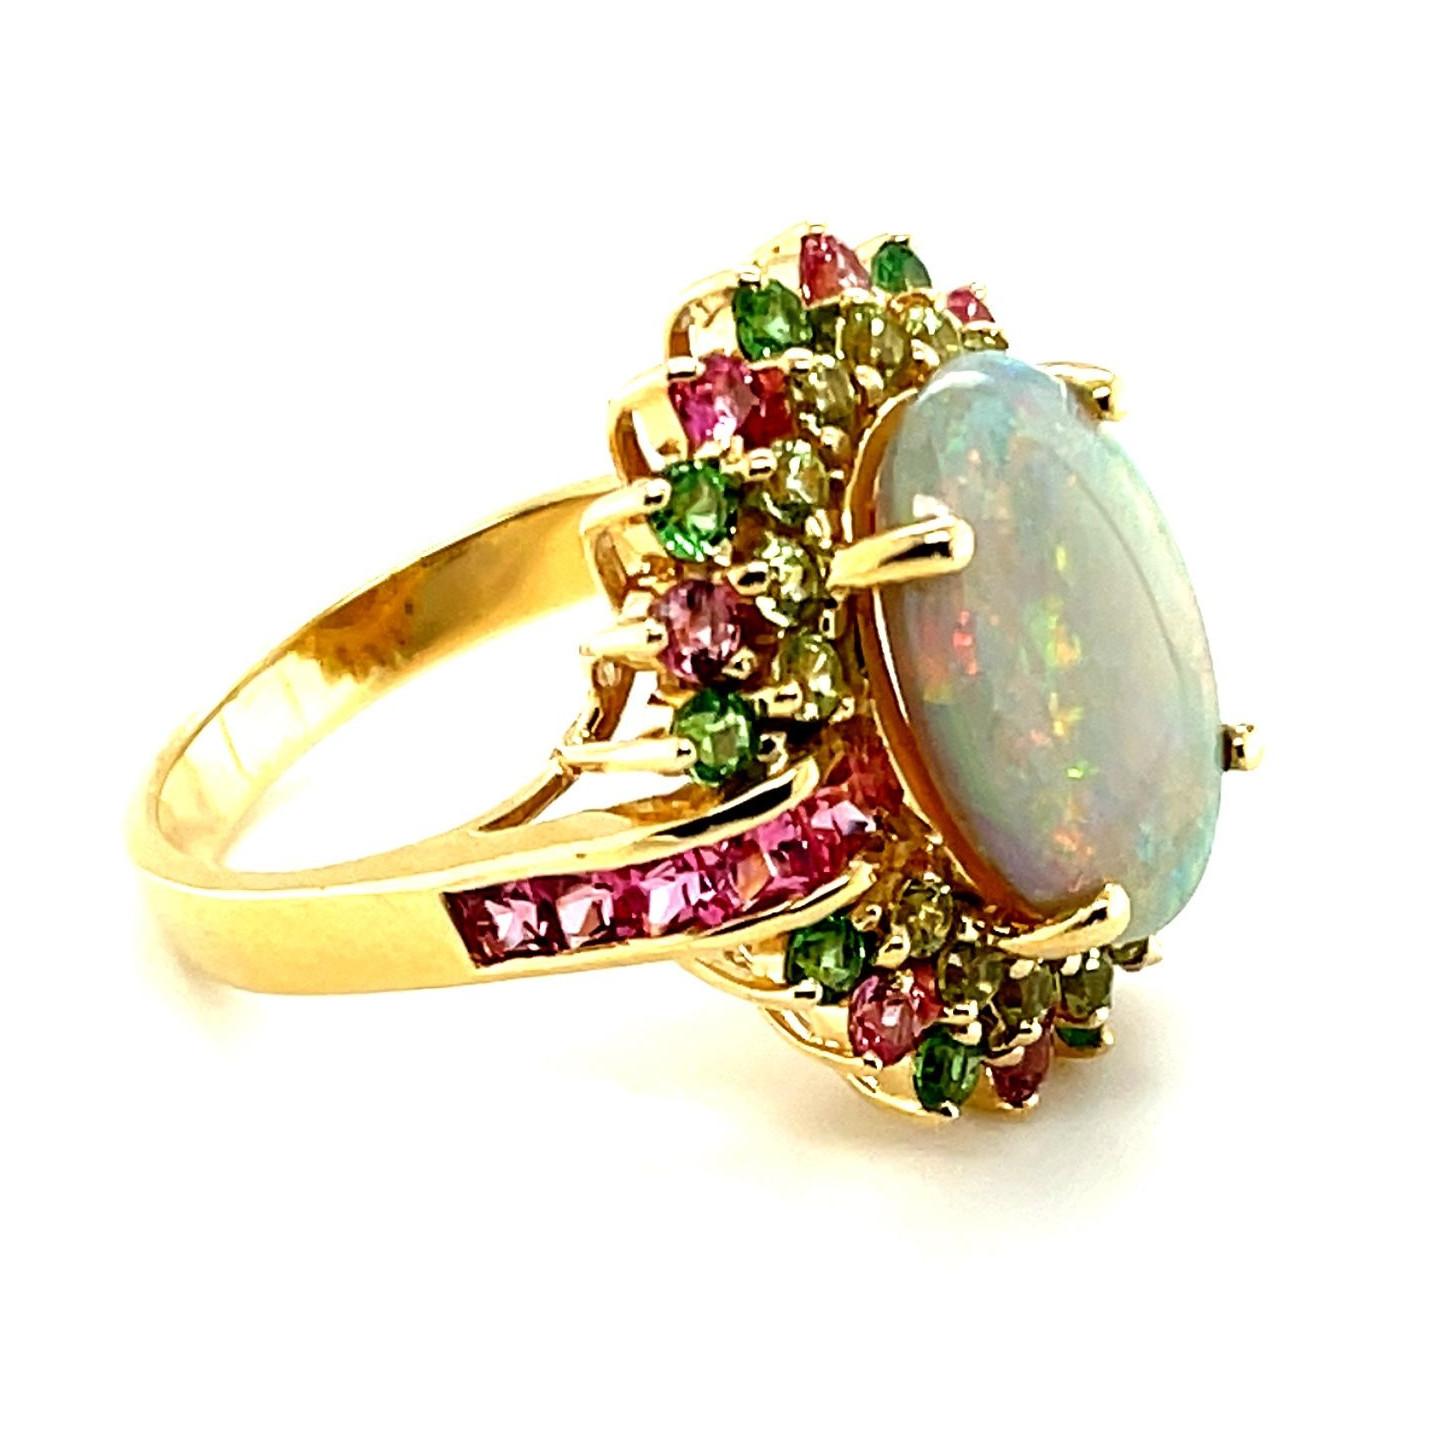 A beautiful, prismatic, 4.14 carat opal is central to this fun 14k yellow gold cocktail ring set with peridots, pink spinels and tsavorite garnets. Each of the gemstones chosen for this ring highlights this opal's fine play-of-color, making this